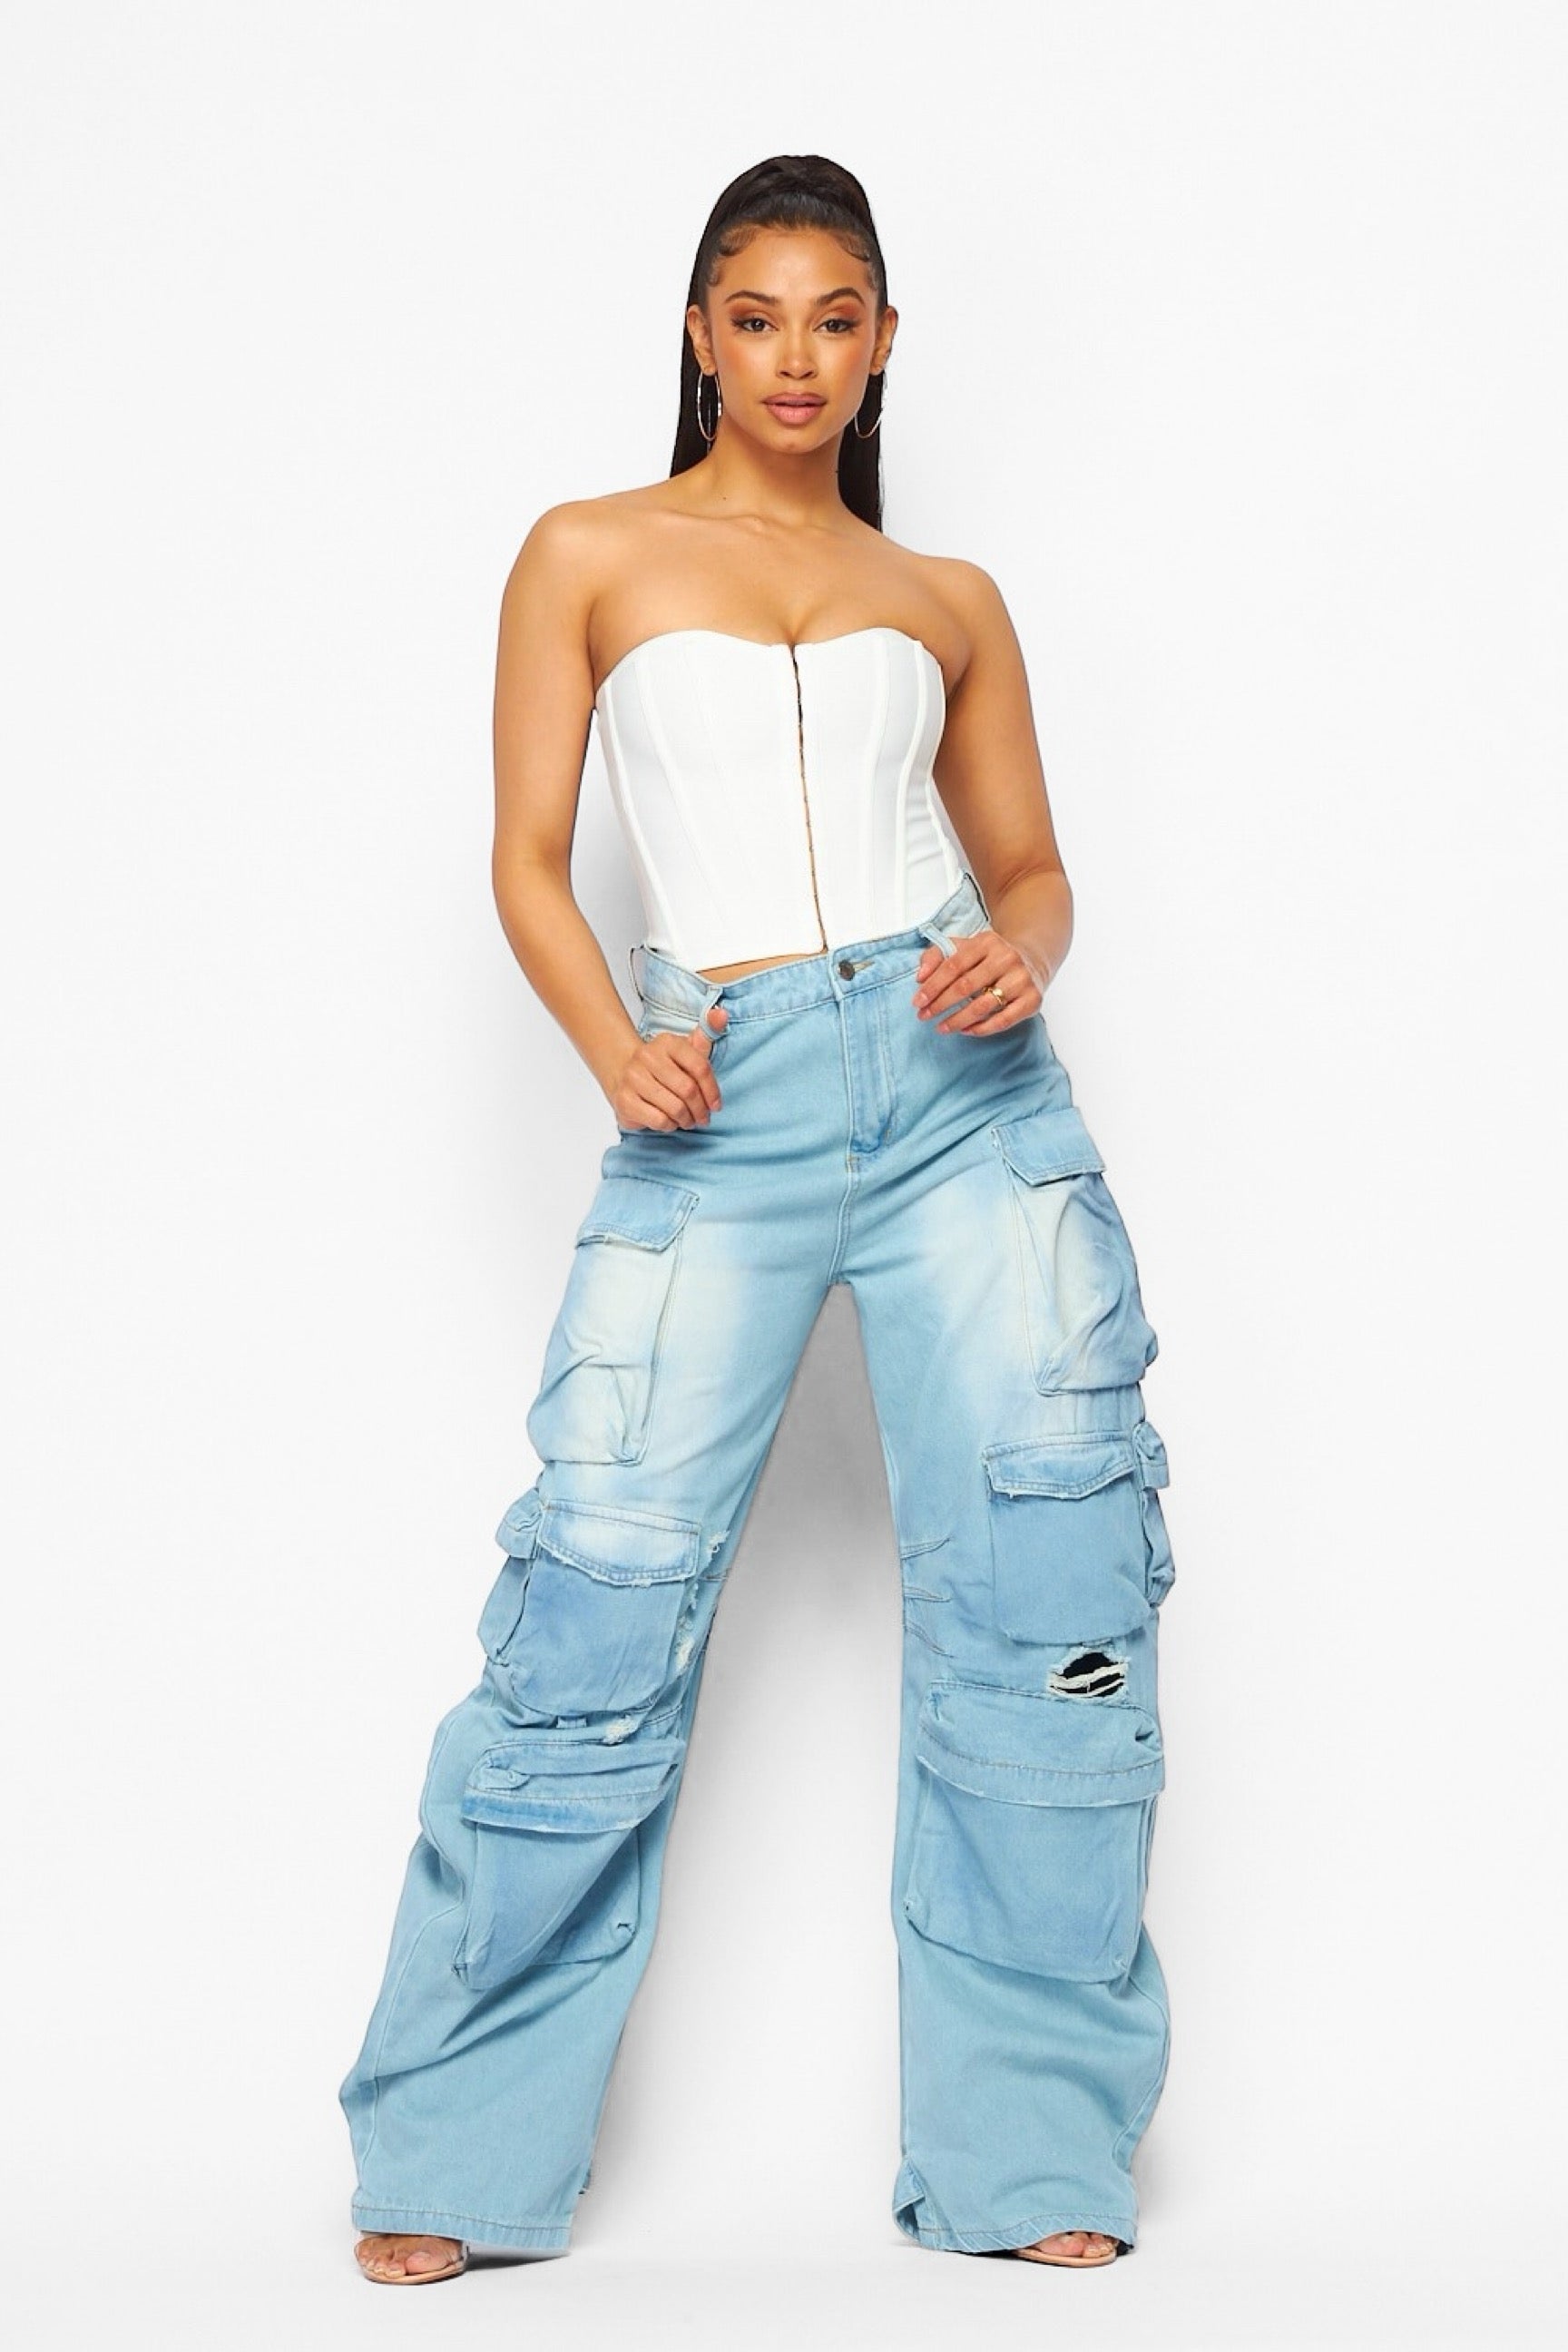 Make your move cargo jeans